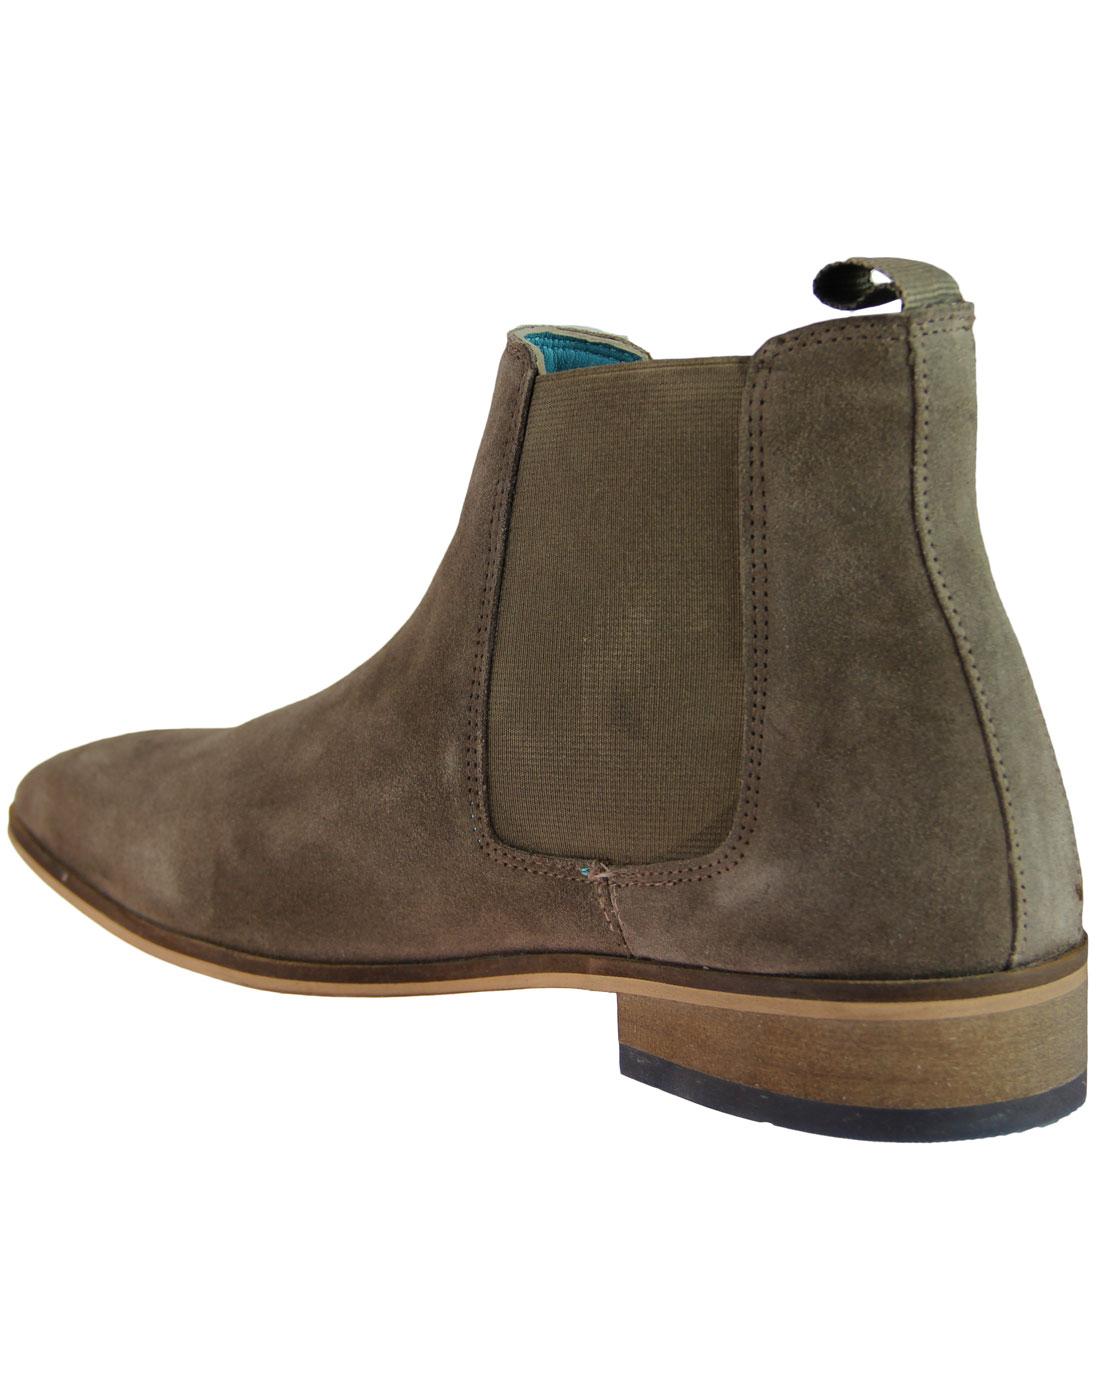 PAOLO VANDINI Smokey Retro Suede Chelsea Boots in Taupe